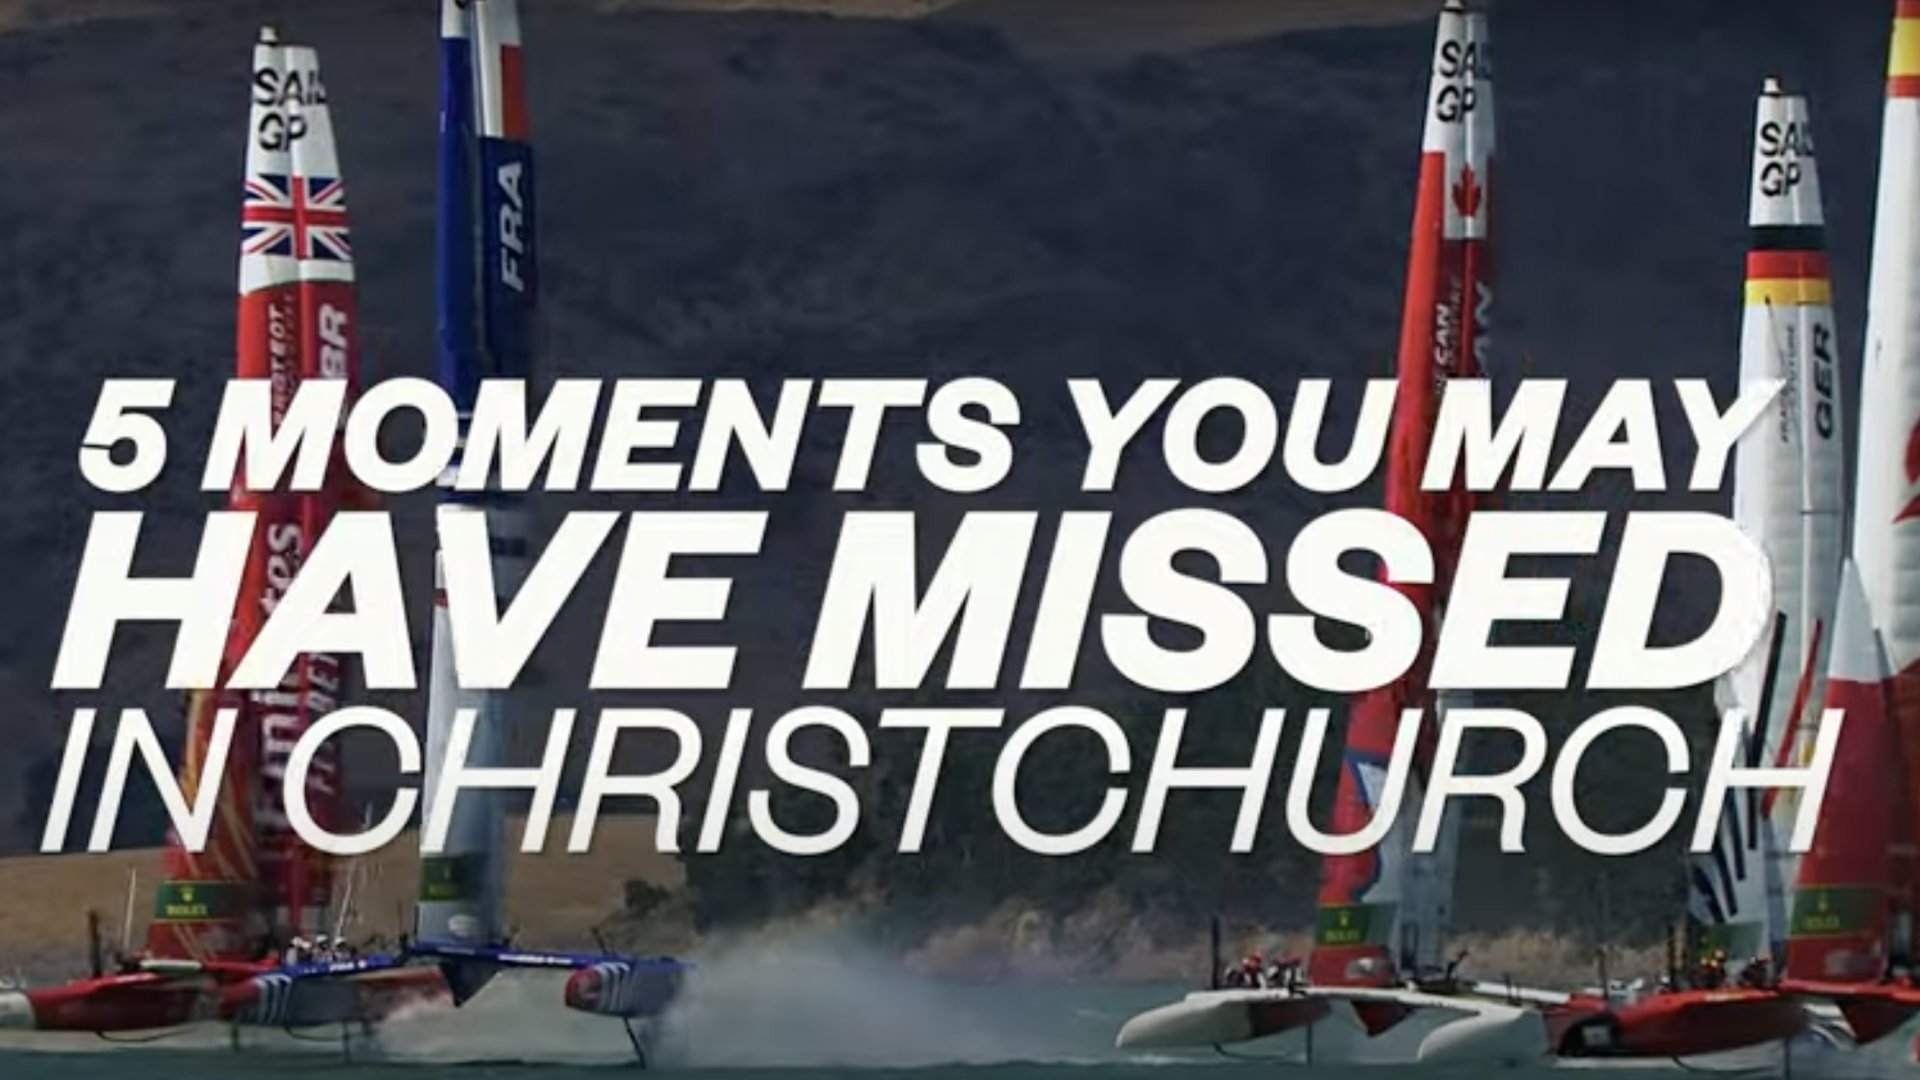 WATCH: 5 moments you might have missed from Christchurch